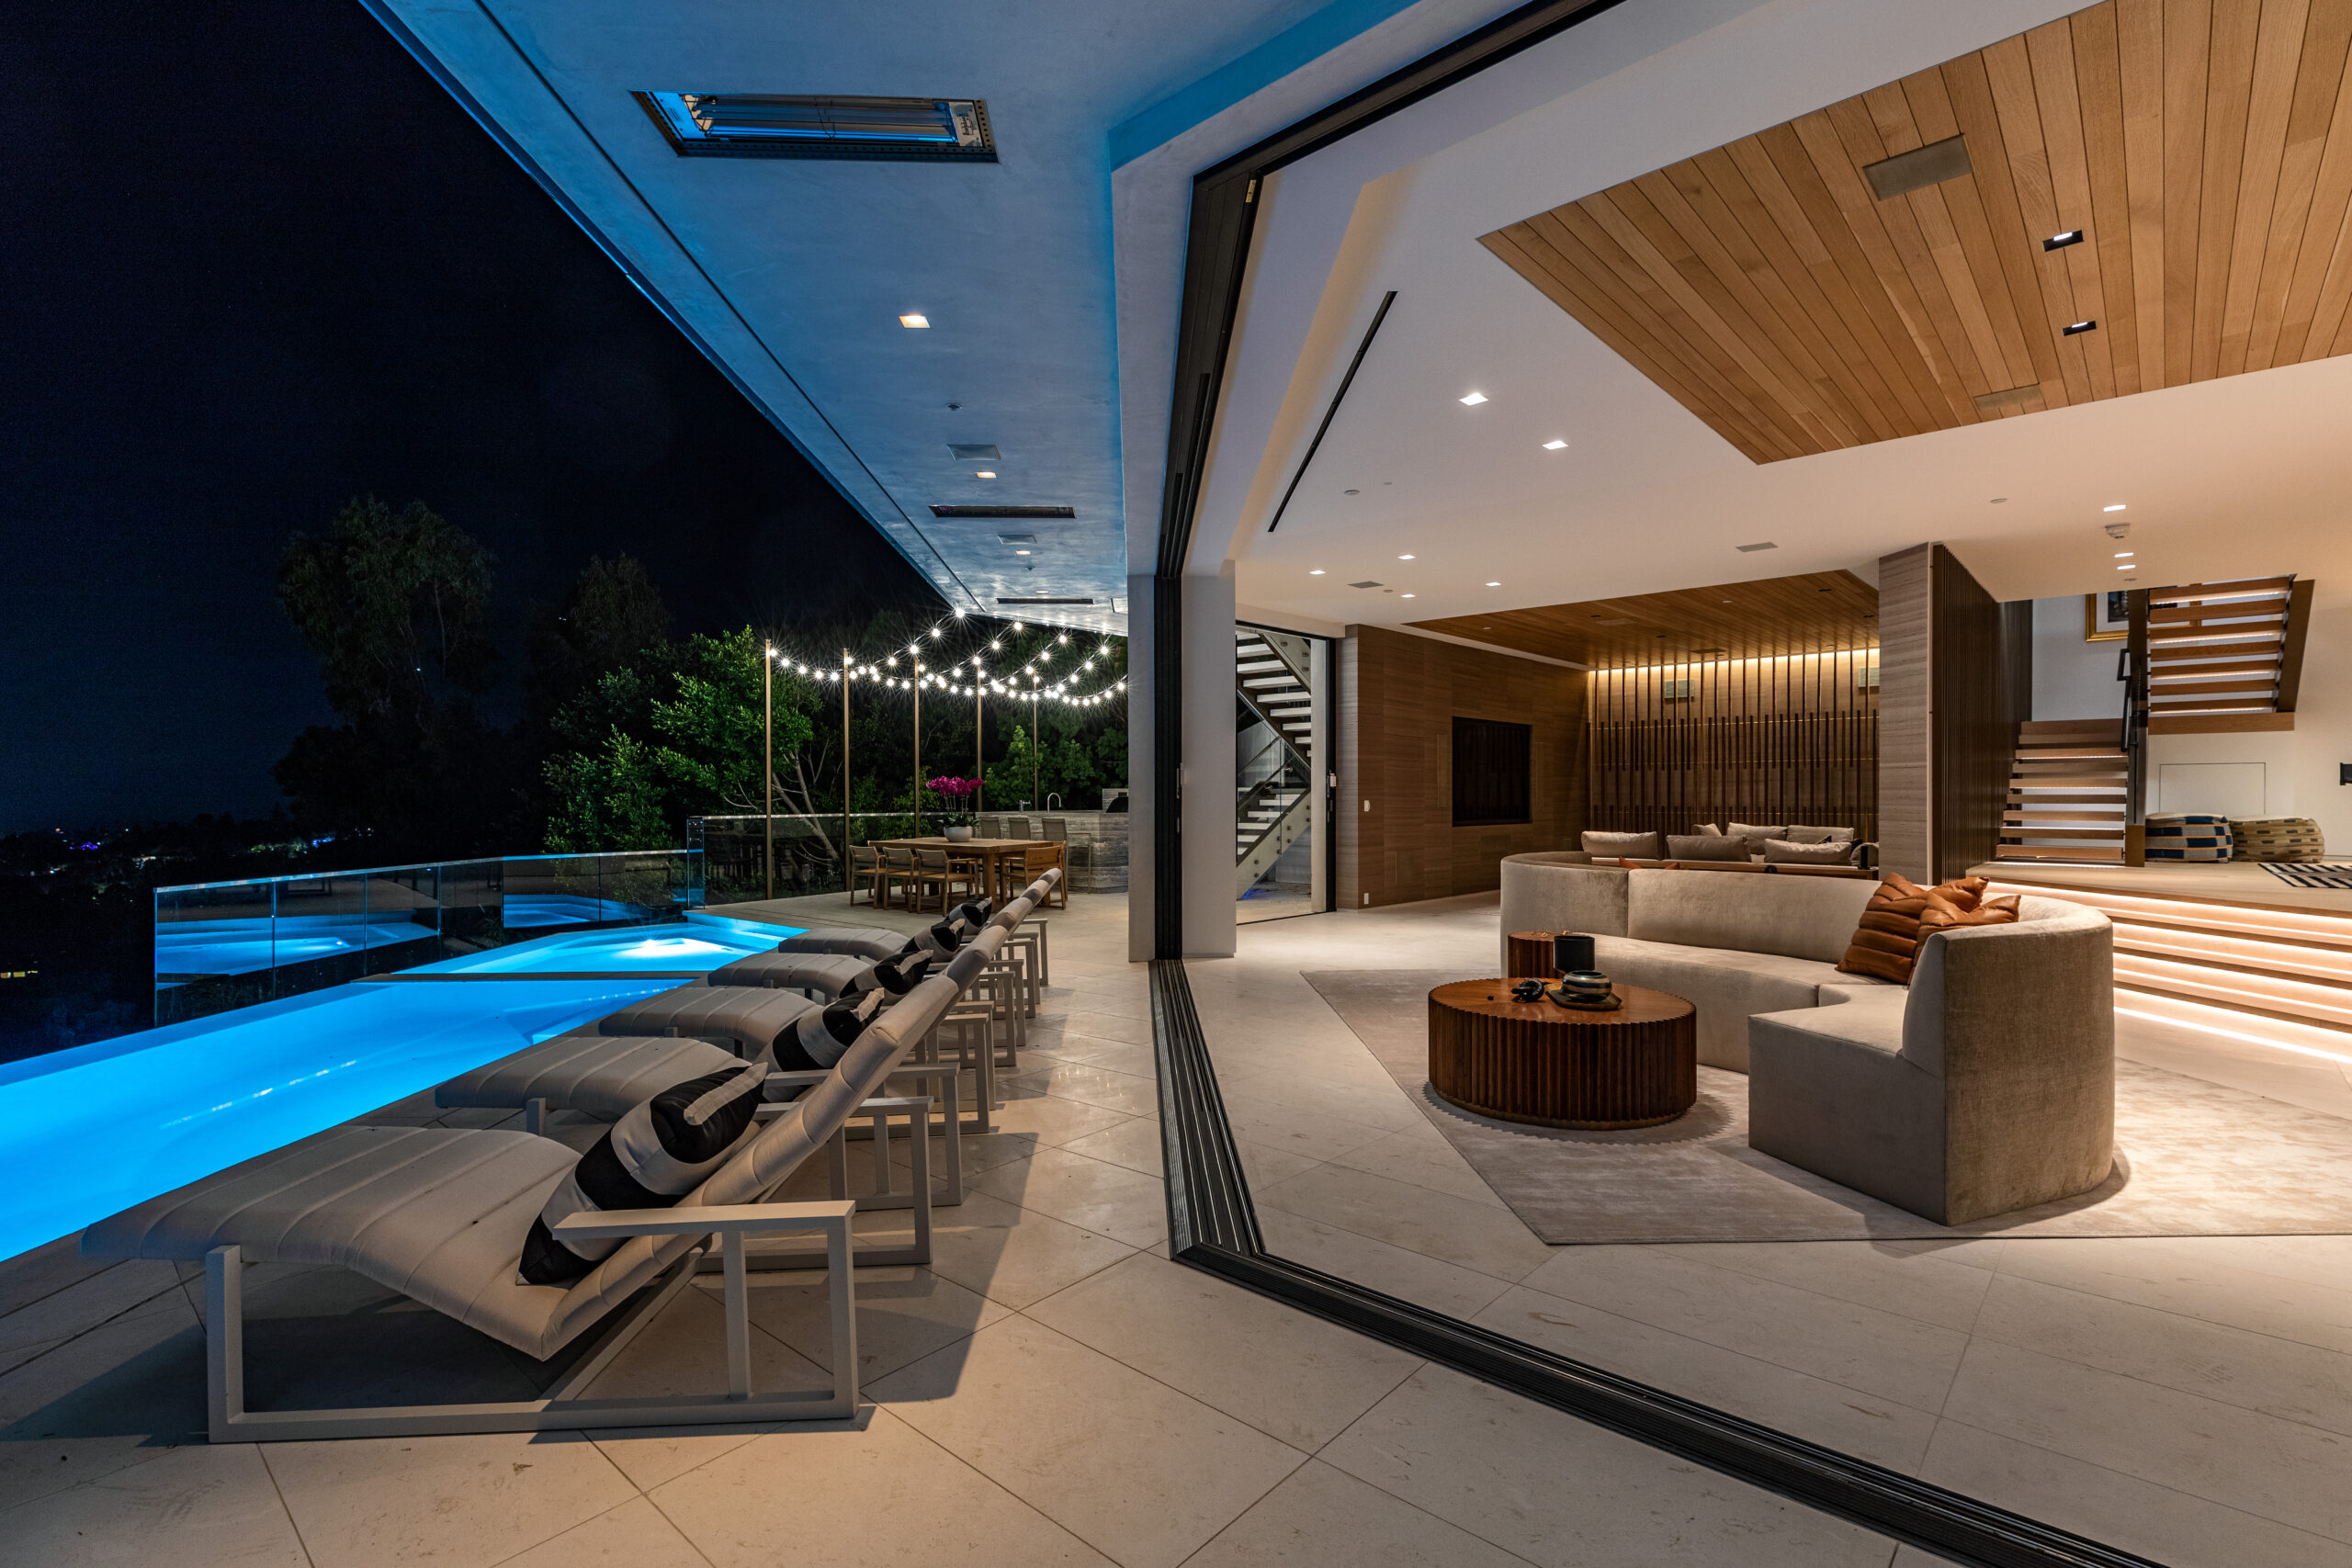 A pool and lounge chairs in the middle of an indoor living room.